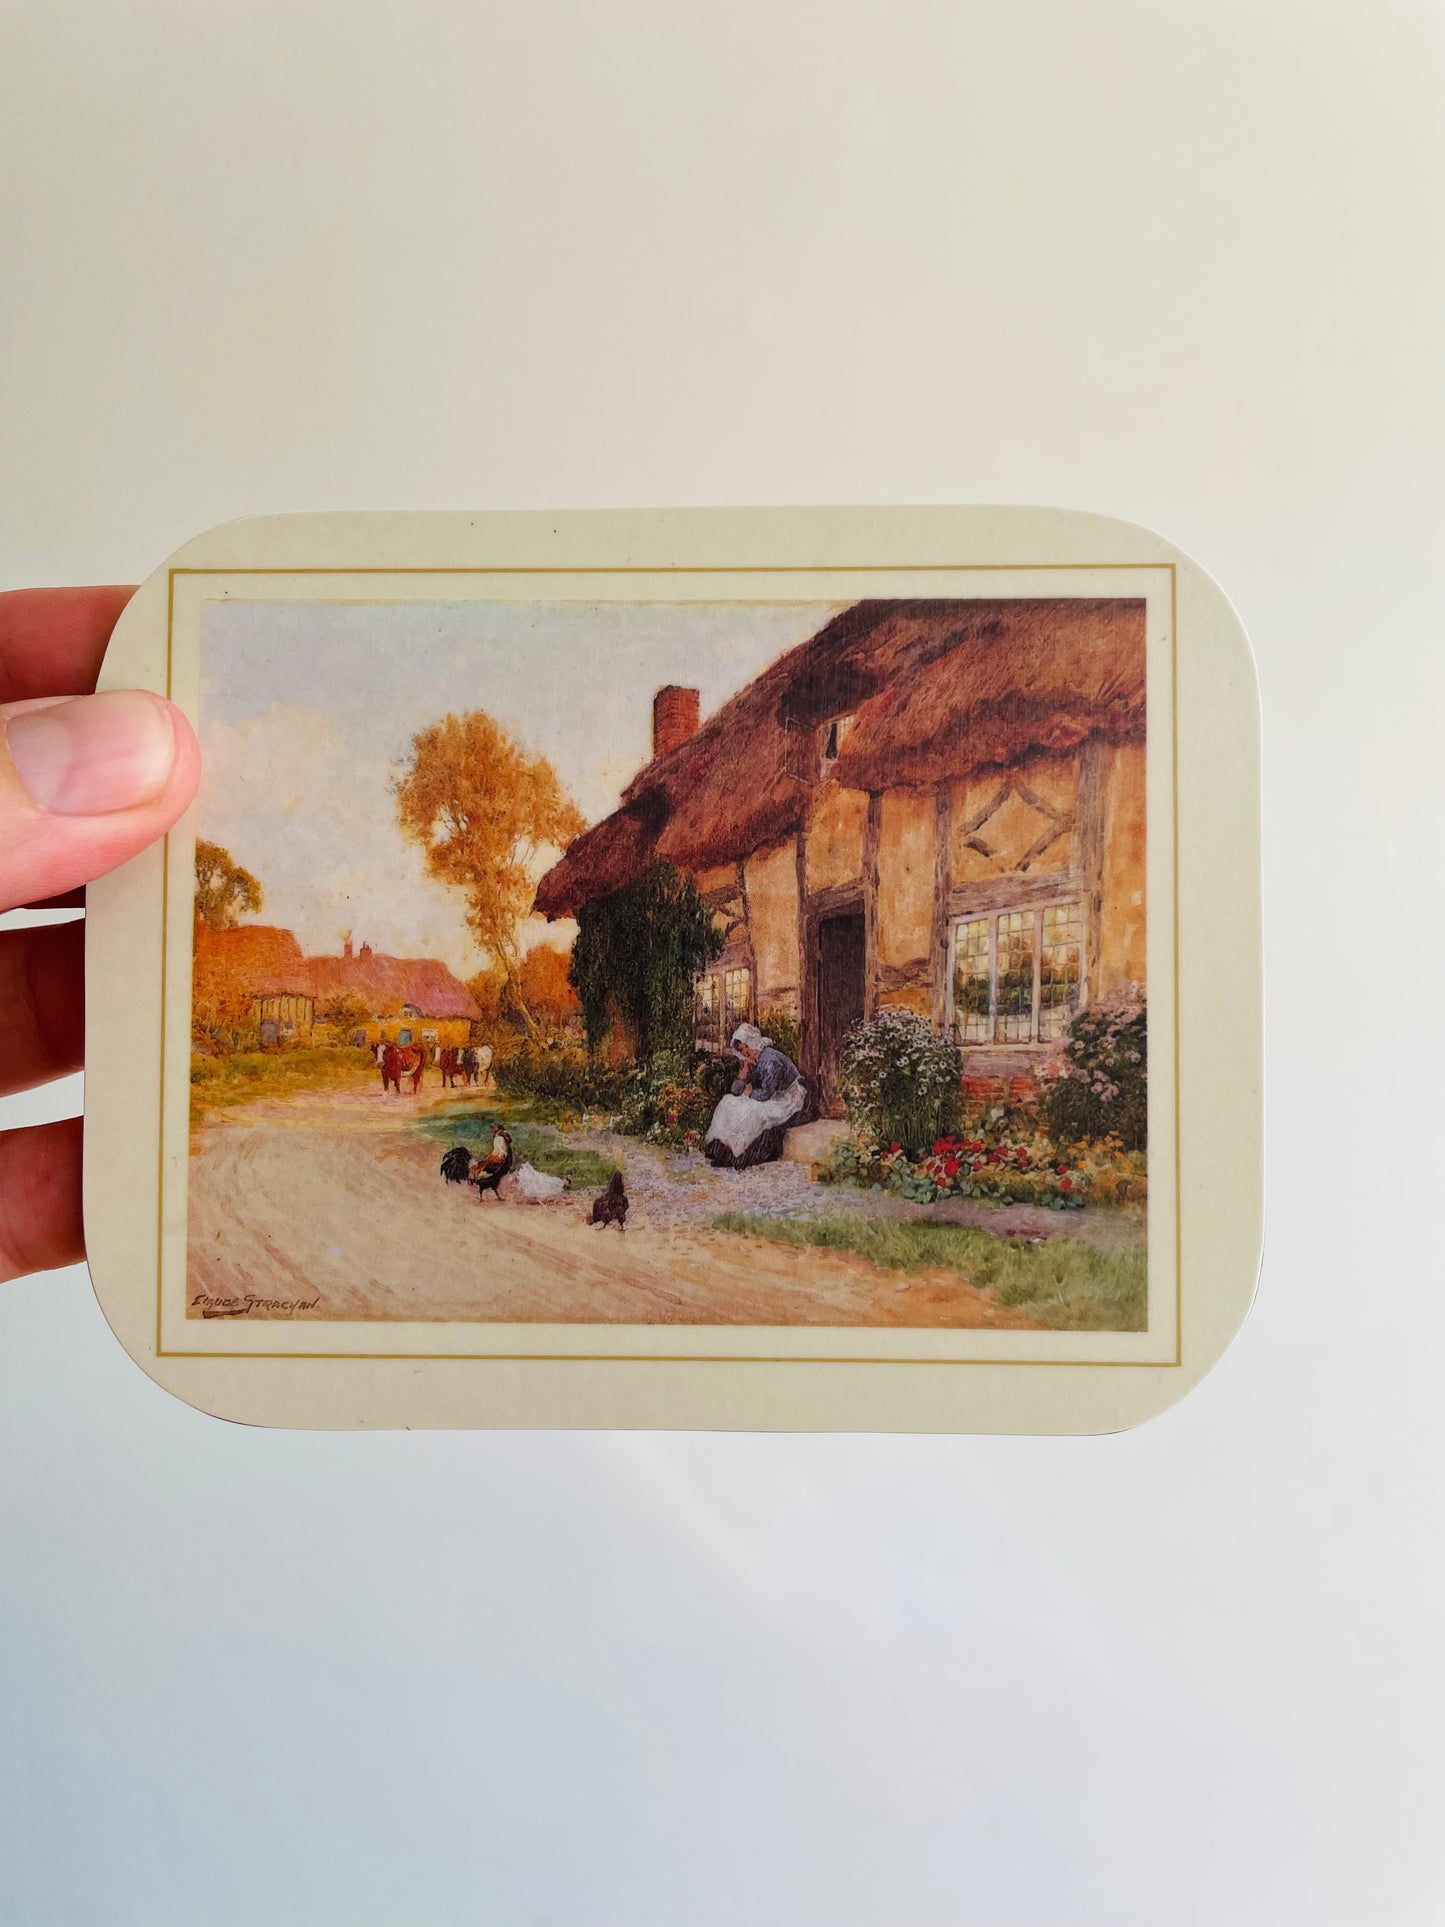 Orchard Melamine Products - Arthur Claude Strachan Rural Cottages - Set of 6 Drink Coasters - Made in England